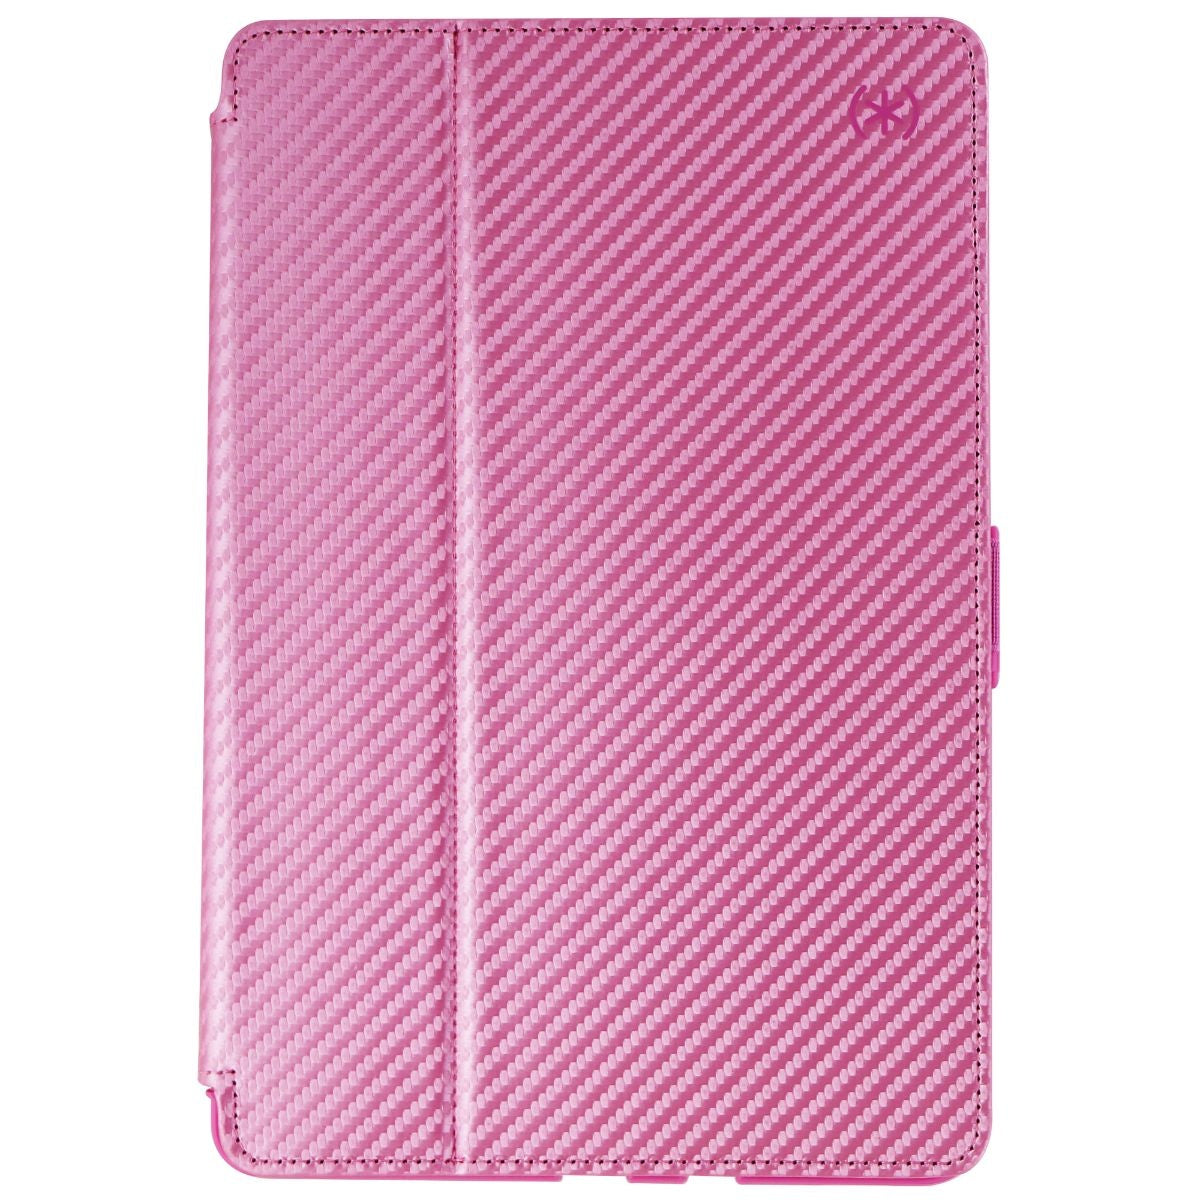 Speck Balance Folio Metallic Series Case for Samsung Galaxy Tab S4 - Pink iPad/Tablet Accessories - Cases, Covers, Keyboard Folios Speck    - Simple Cell Bulk Wholesale Pricing - USA Seller